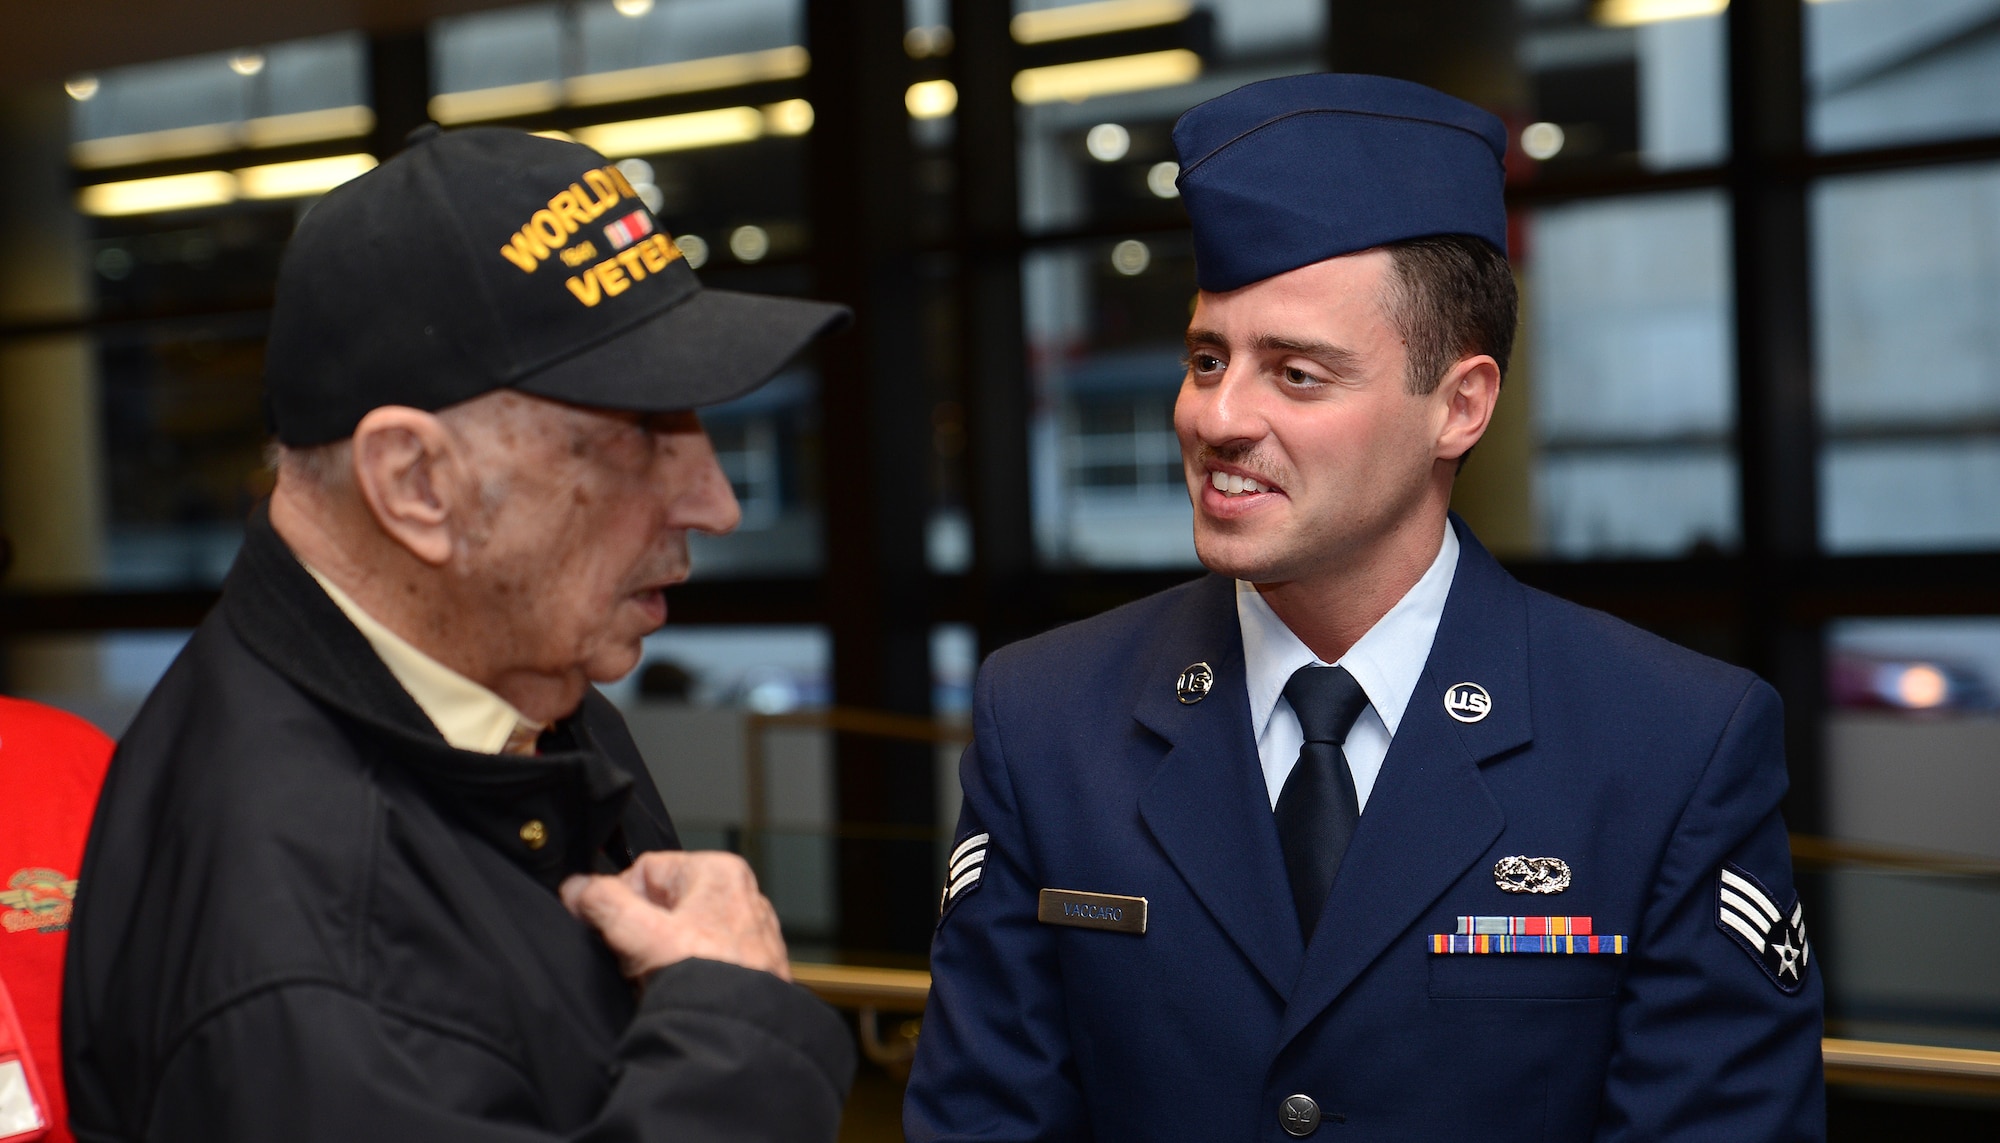 Senior Airman Nino Vaccaro, 62nd Maintenance Squadron aerospace propulsions specialist, entertains a local World War II veteran taking part in the Puget Sound Honor Flight April 24, 2017, at Seattle-Tacoma International Airport Seattle, Wash. The event is one of four done annually by the Puget Sound Honor Flight, a nonprofit organization founded to serve U.S. Veterans. (U.S. Air Force photo/Senior Airman Jacob Jimenez) 